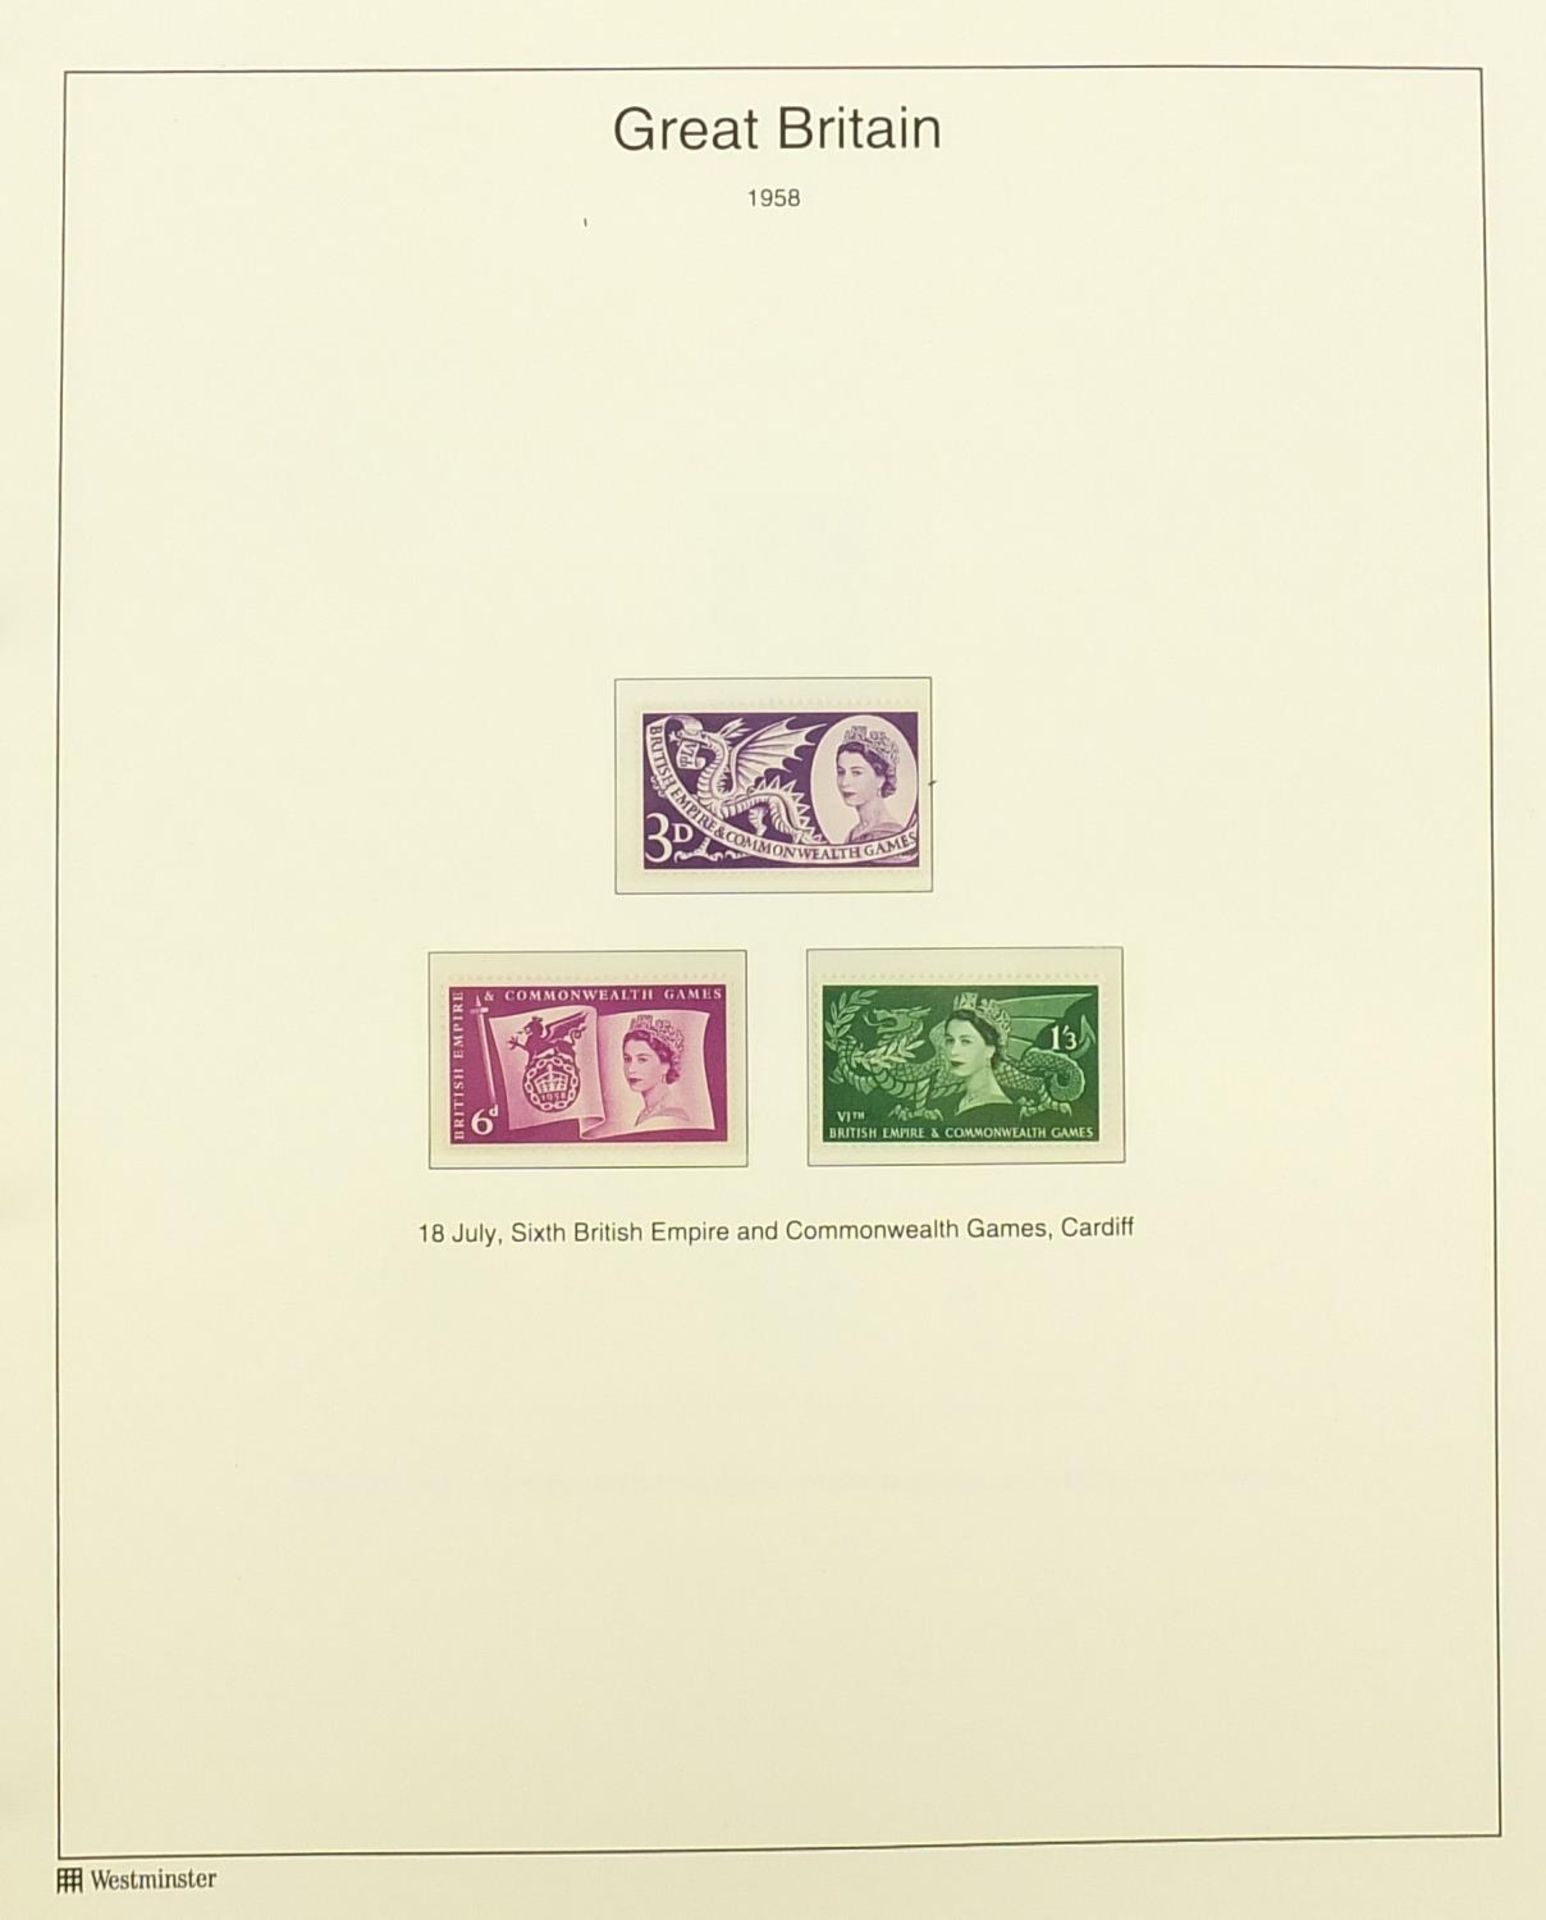 Collection of British stamps arranged in an album - Image 2 of 8